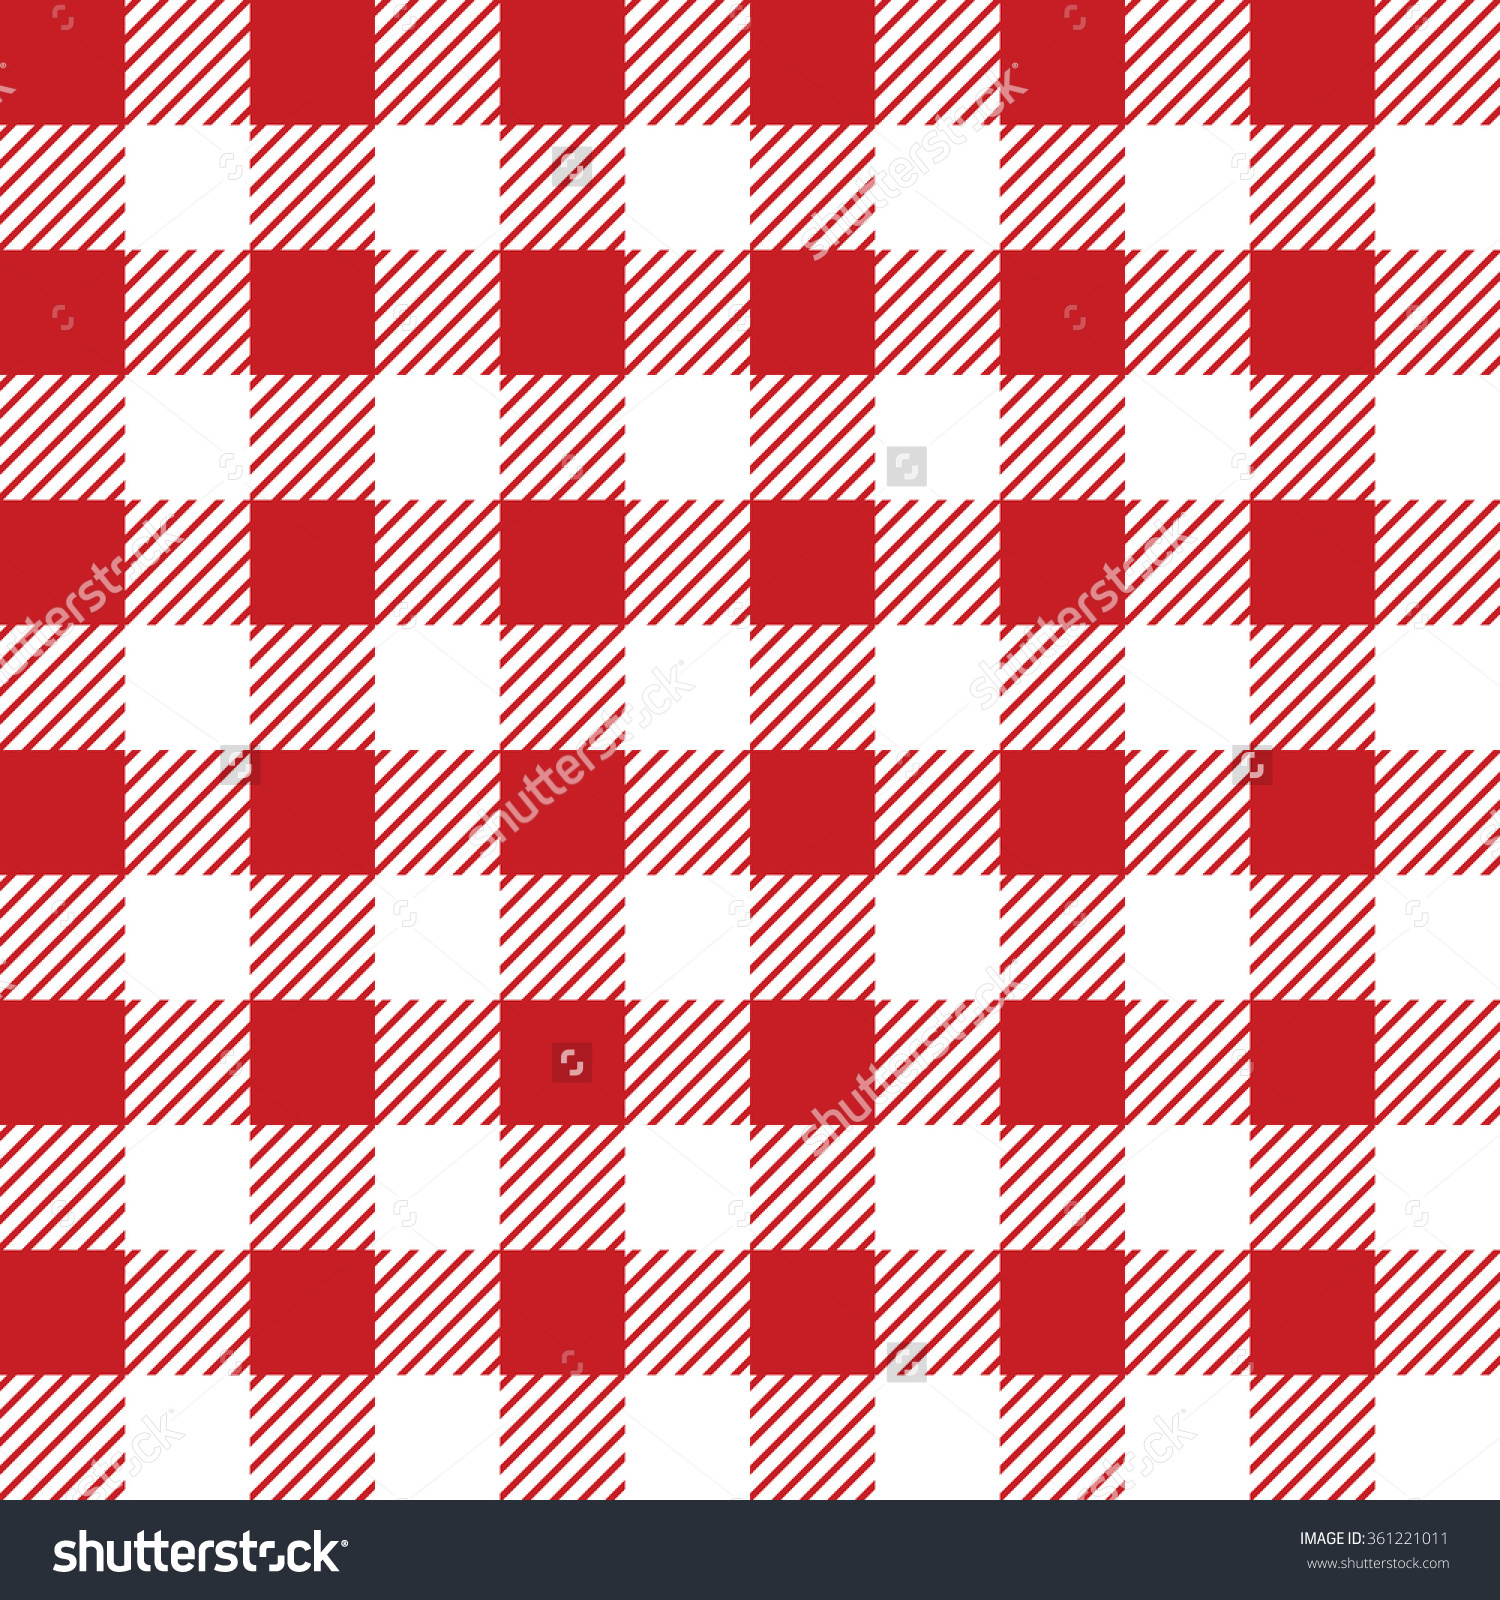 Checkered tablecloth background clipart.